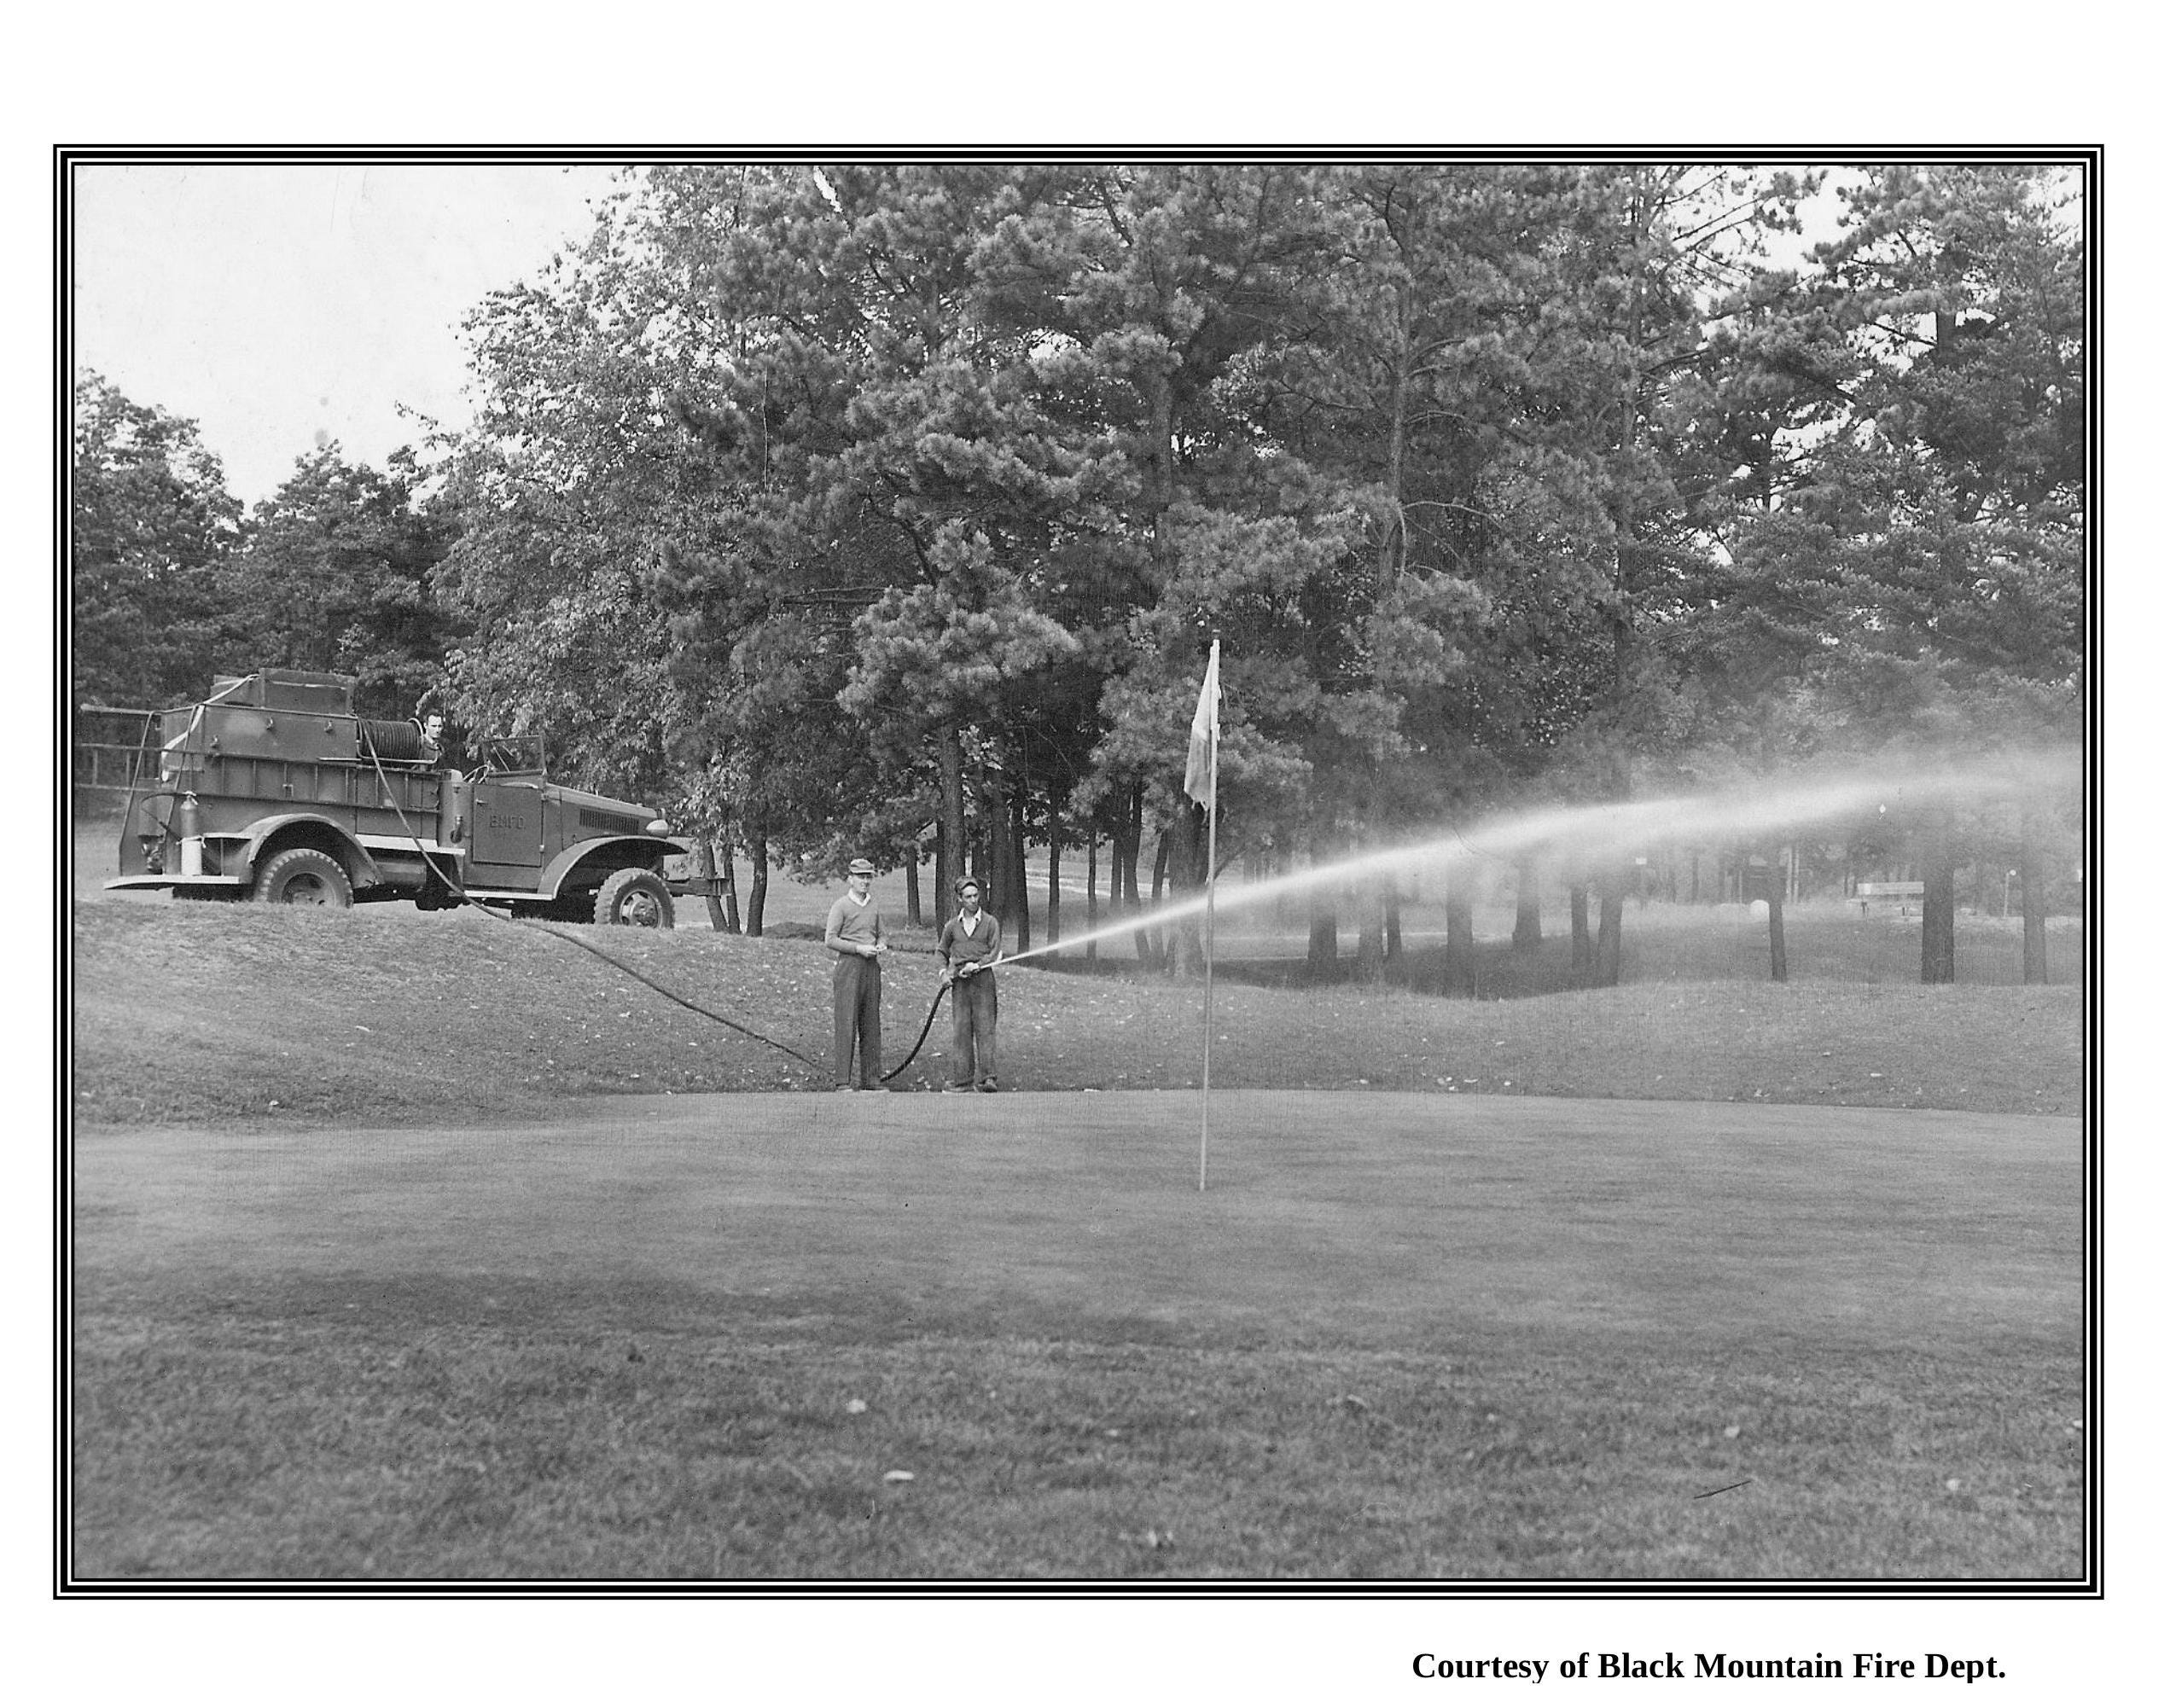 This undated photograph gives us a glimpse into the Black Mountain Golf Course operations.